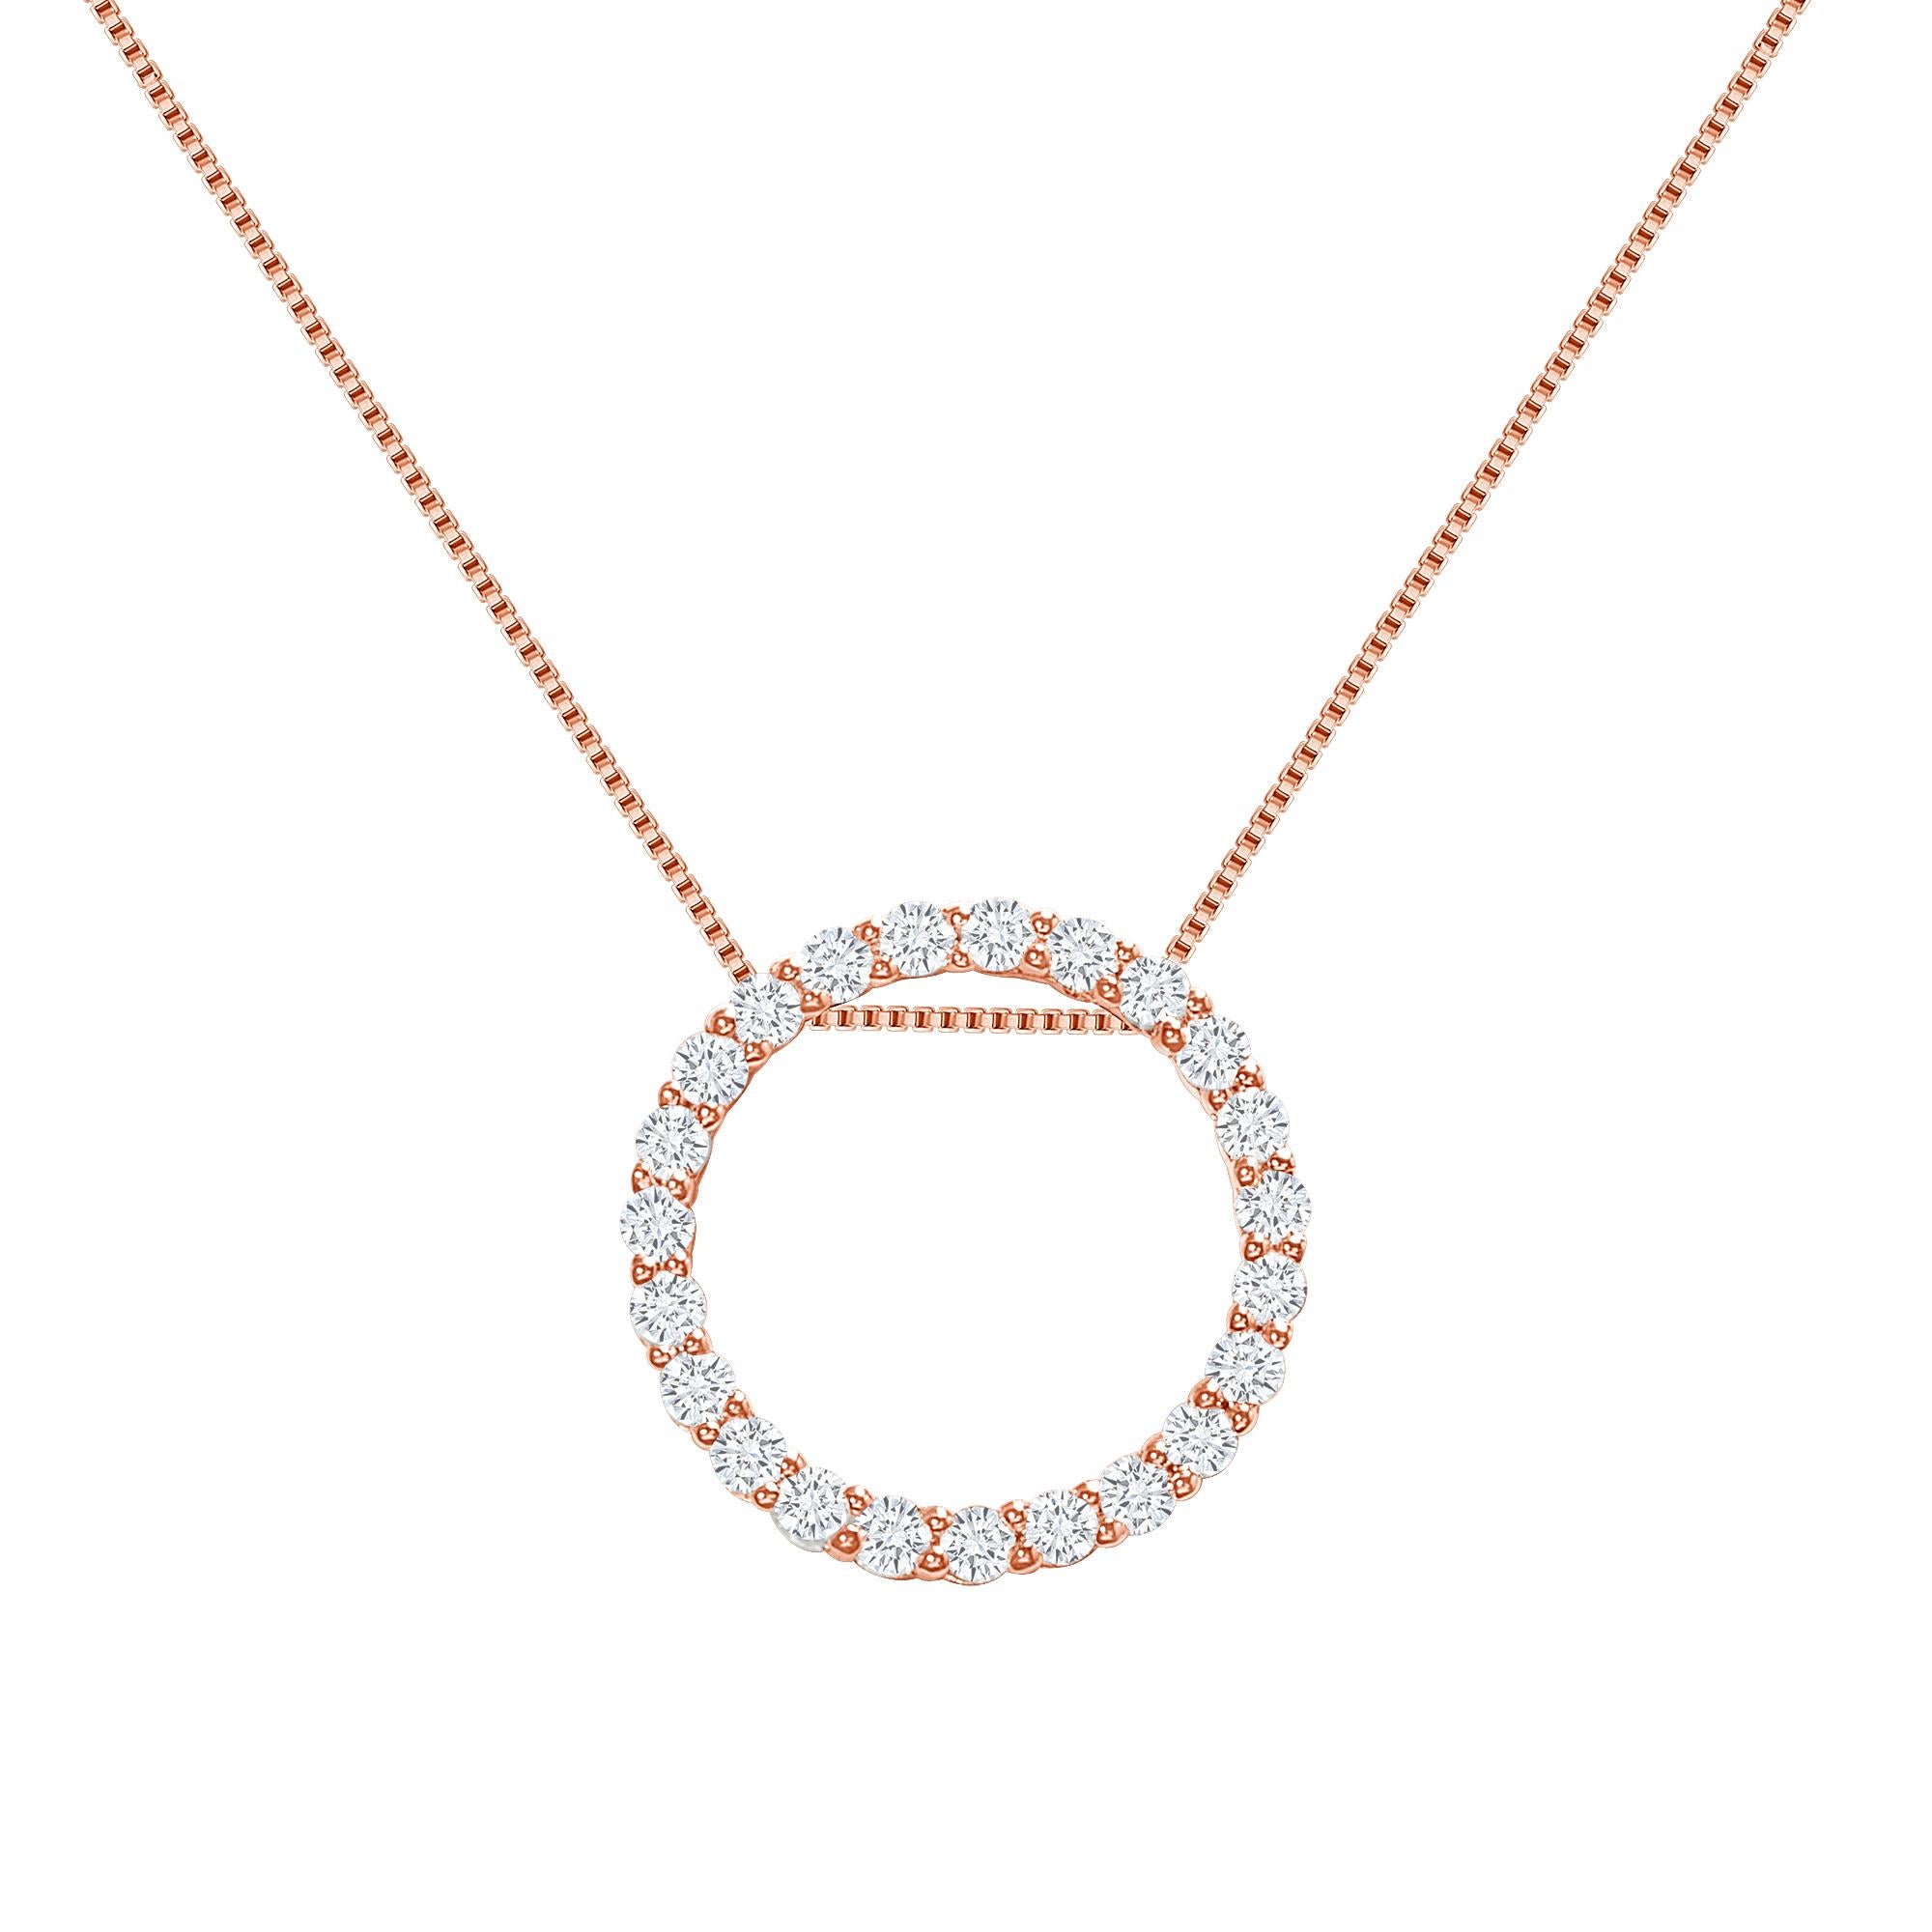 This diamond circle pendant provides a glowing chic look.
Metal: 14k Gold
Diamond Total Carats: 3 carat
Diamond Cut: Round Natural Diamonds (Not Lab Grown)
Diamond Clarity: VS
Diamond Color: F-G
Color: Rose Gold
Necklace Length: 16 inches